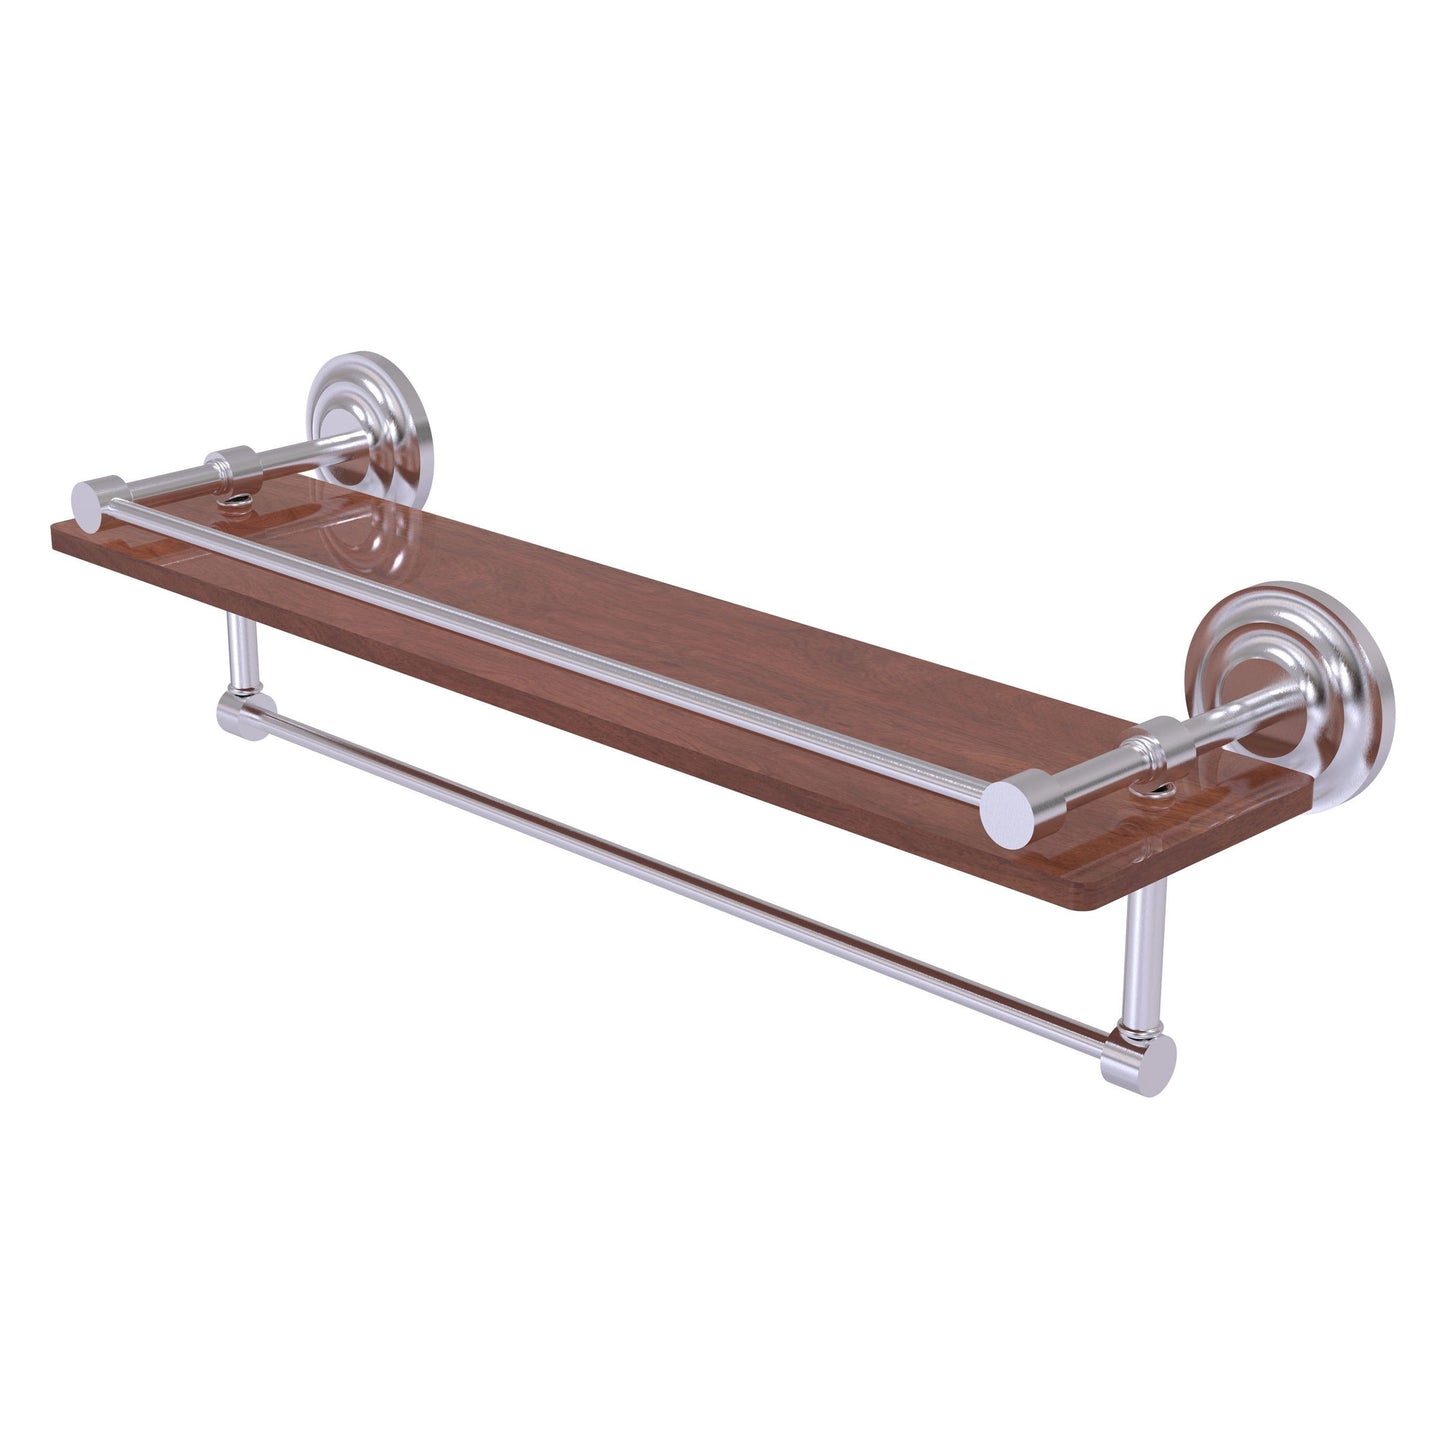 Allied Brass Que New 22" x 5" Satin Chrome Solid Brass 22-Inch IPE Ironwood Shelf With Gallery Rail and Towel Bar